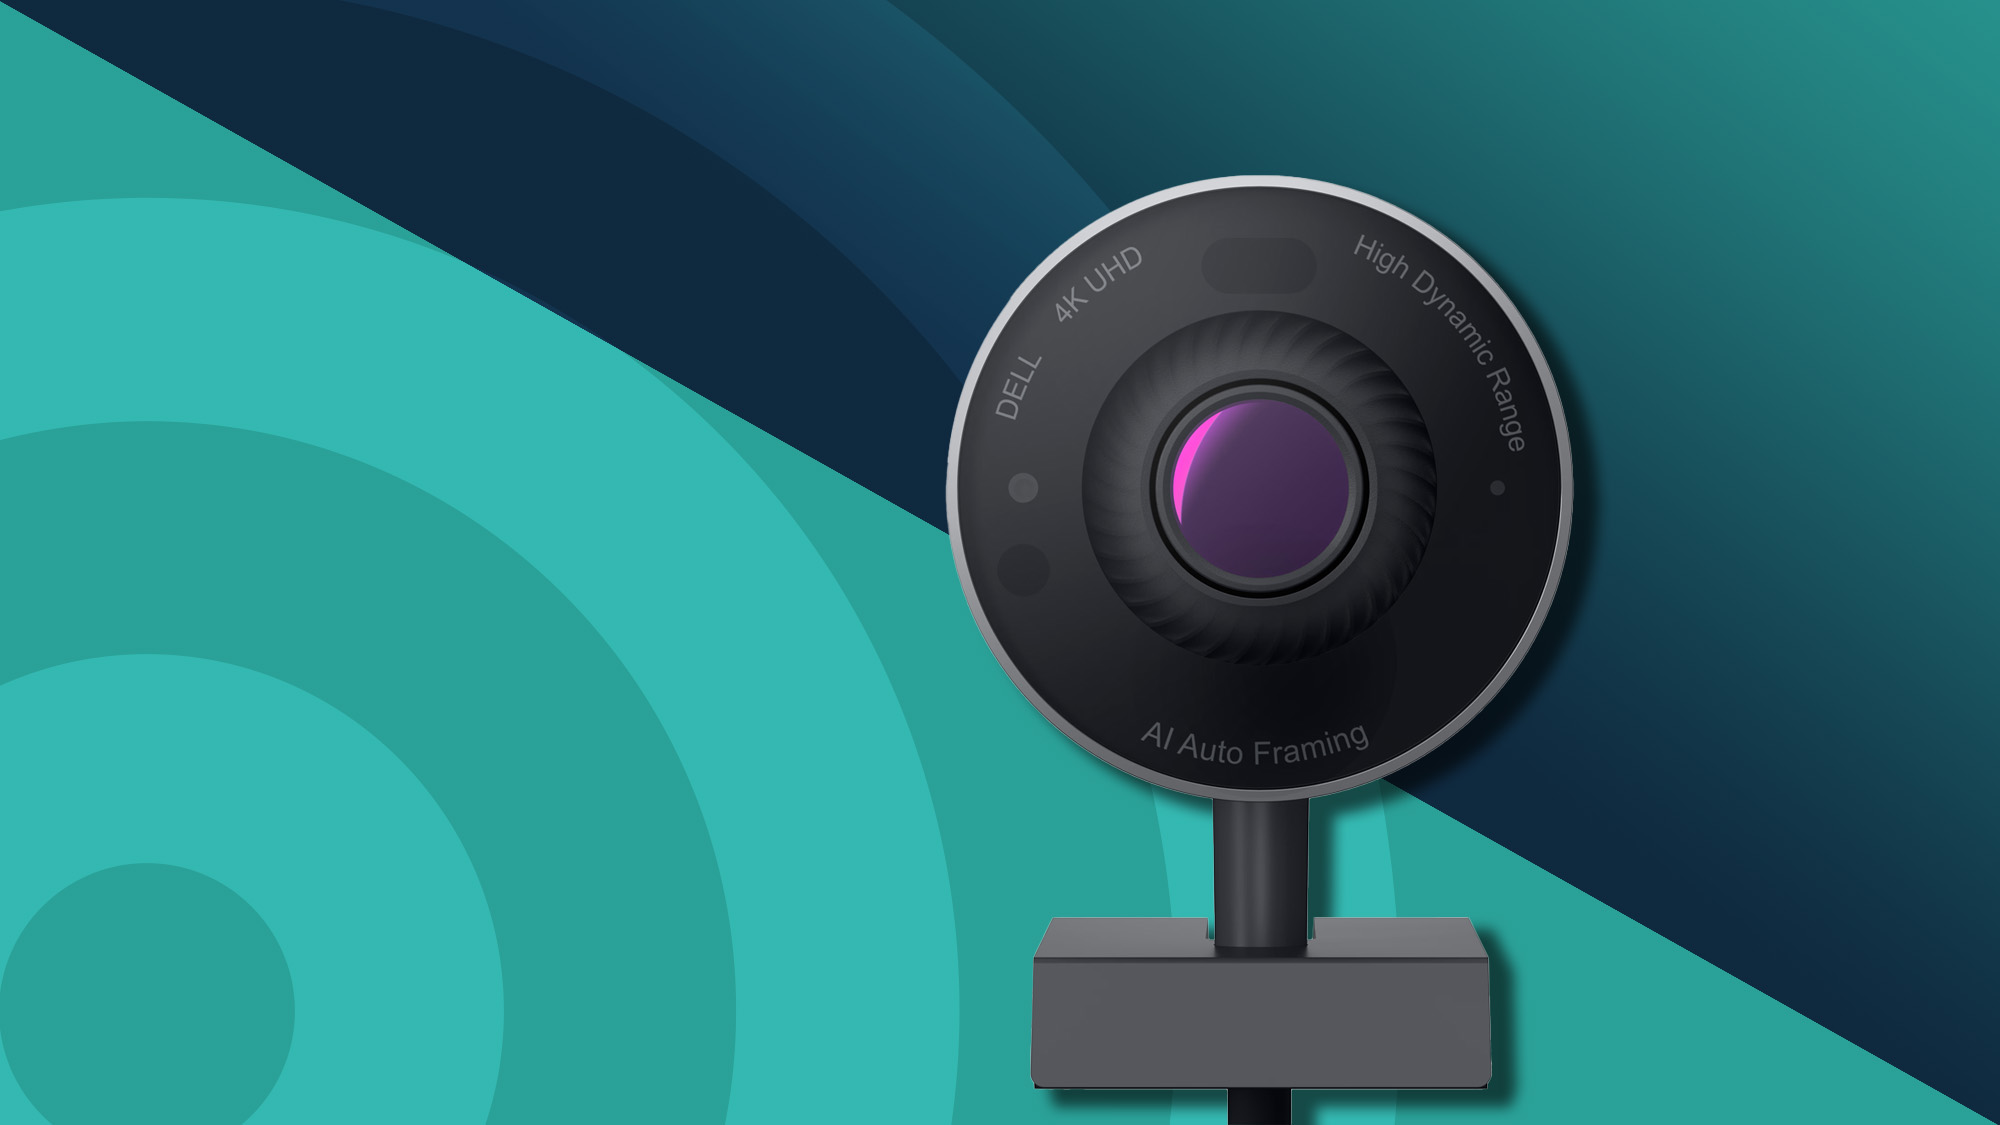 Dell UltraSharp review: This 4K webcam is fantastic for streamers